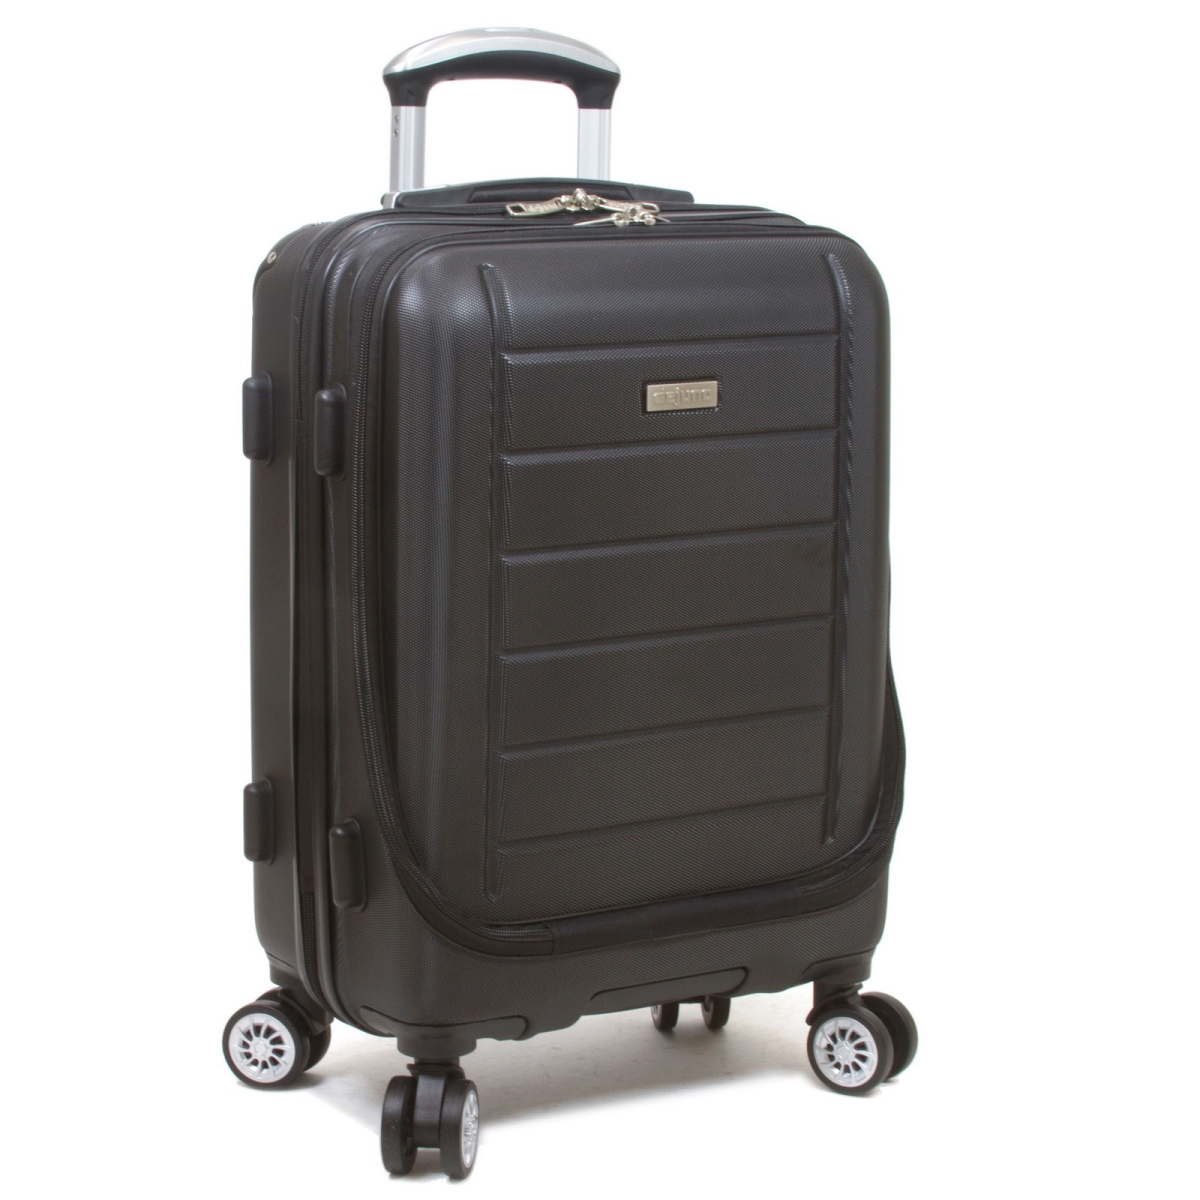 25dj-9902-black 20 In. Compact Hardside Carry-on Luggage With Laptop Pocket, Black